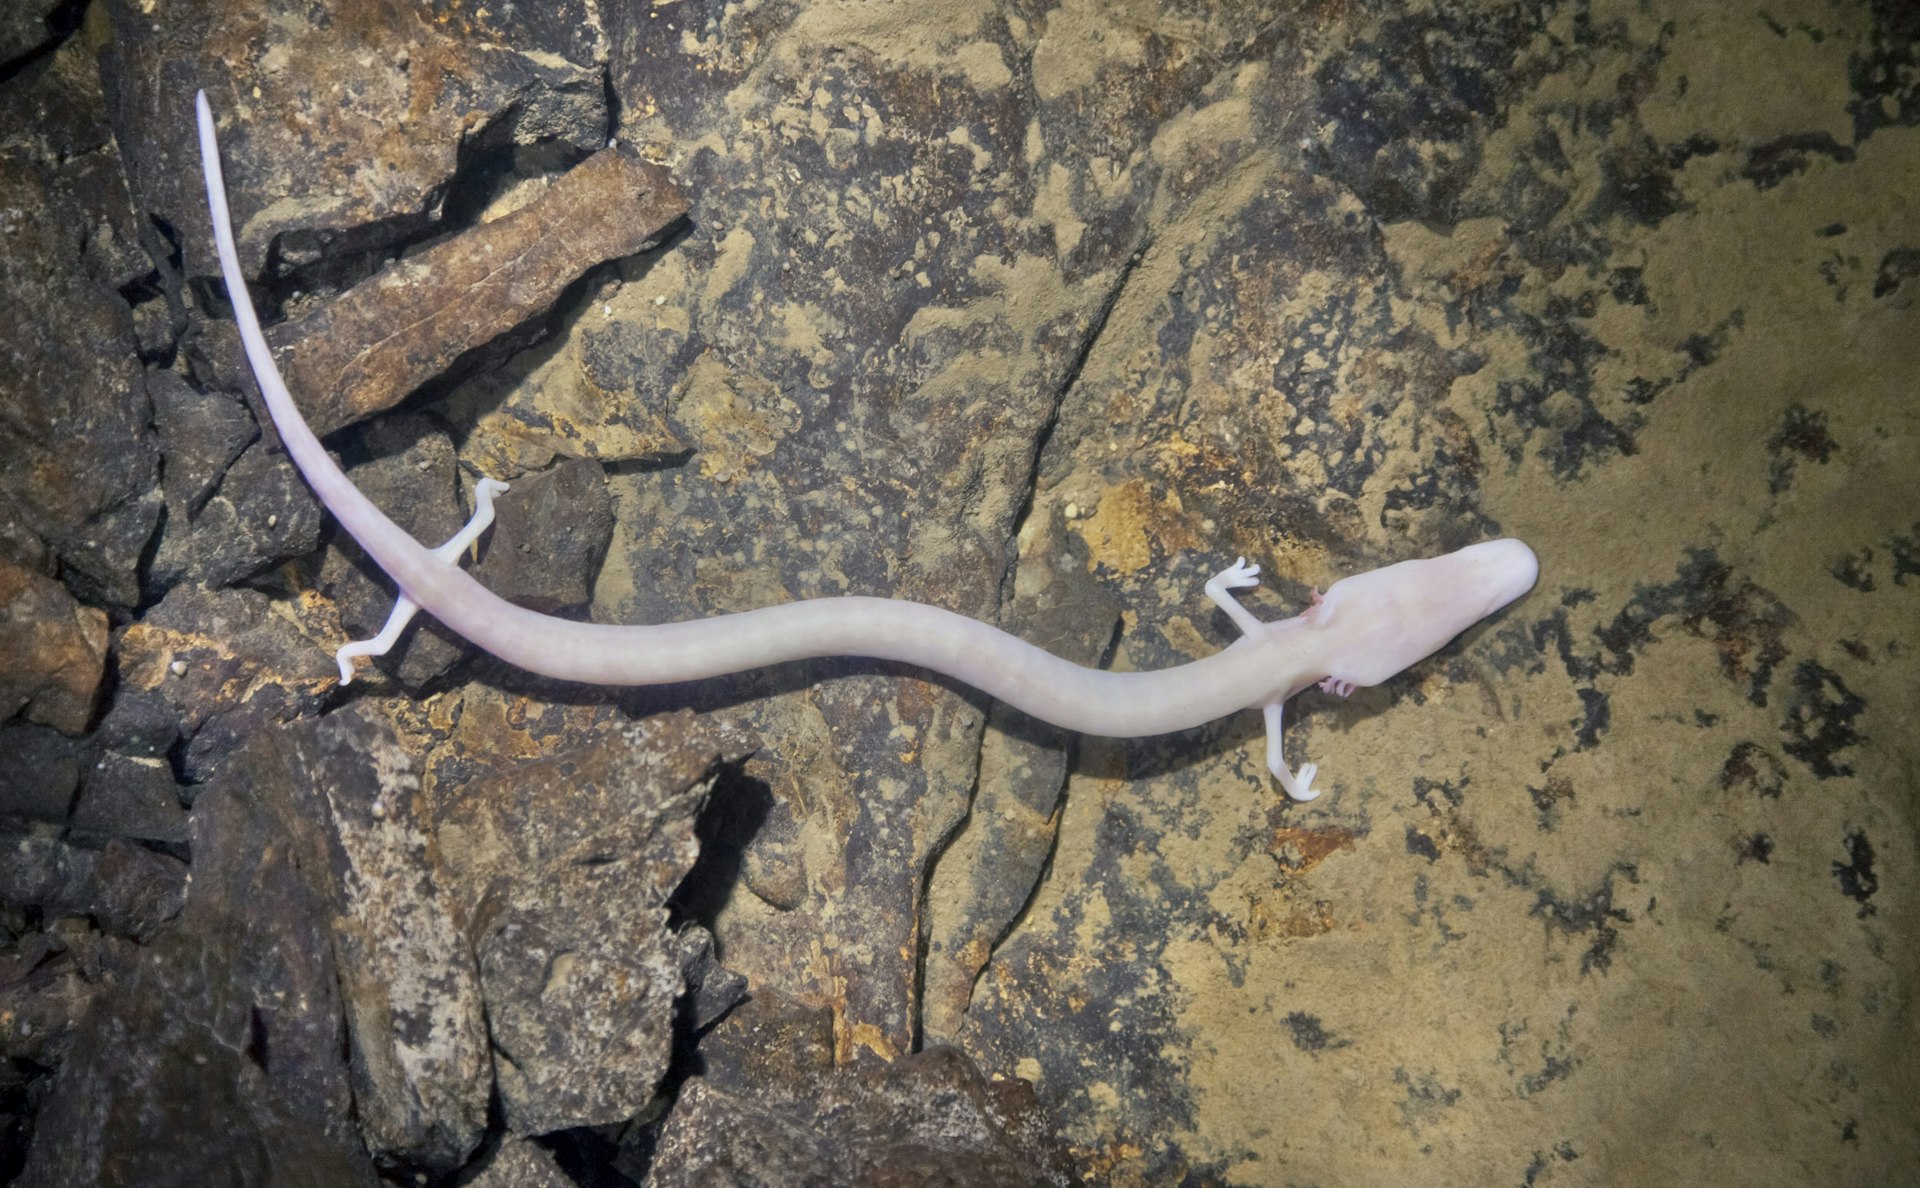 Proteus anguinus, or the olm also called human fish captured in it's natural habitat in Planinska jama underground water cave, Slovenia